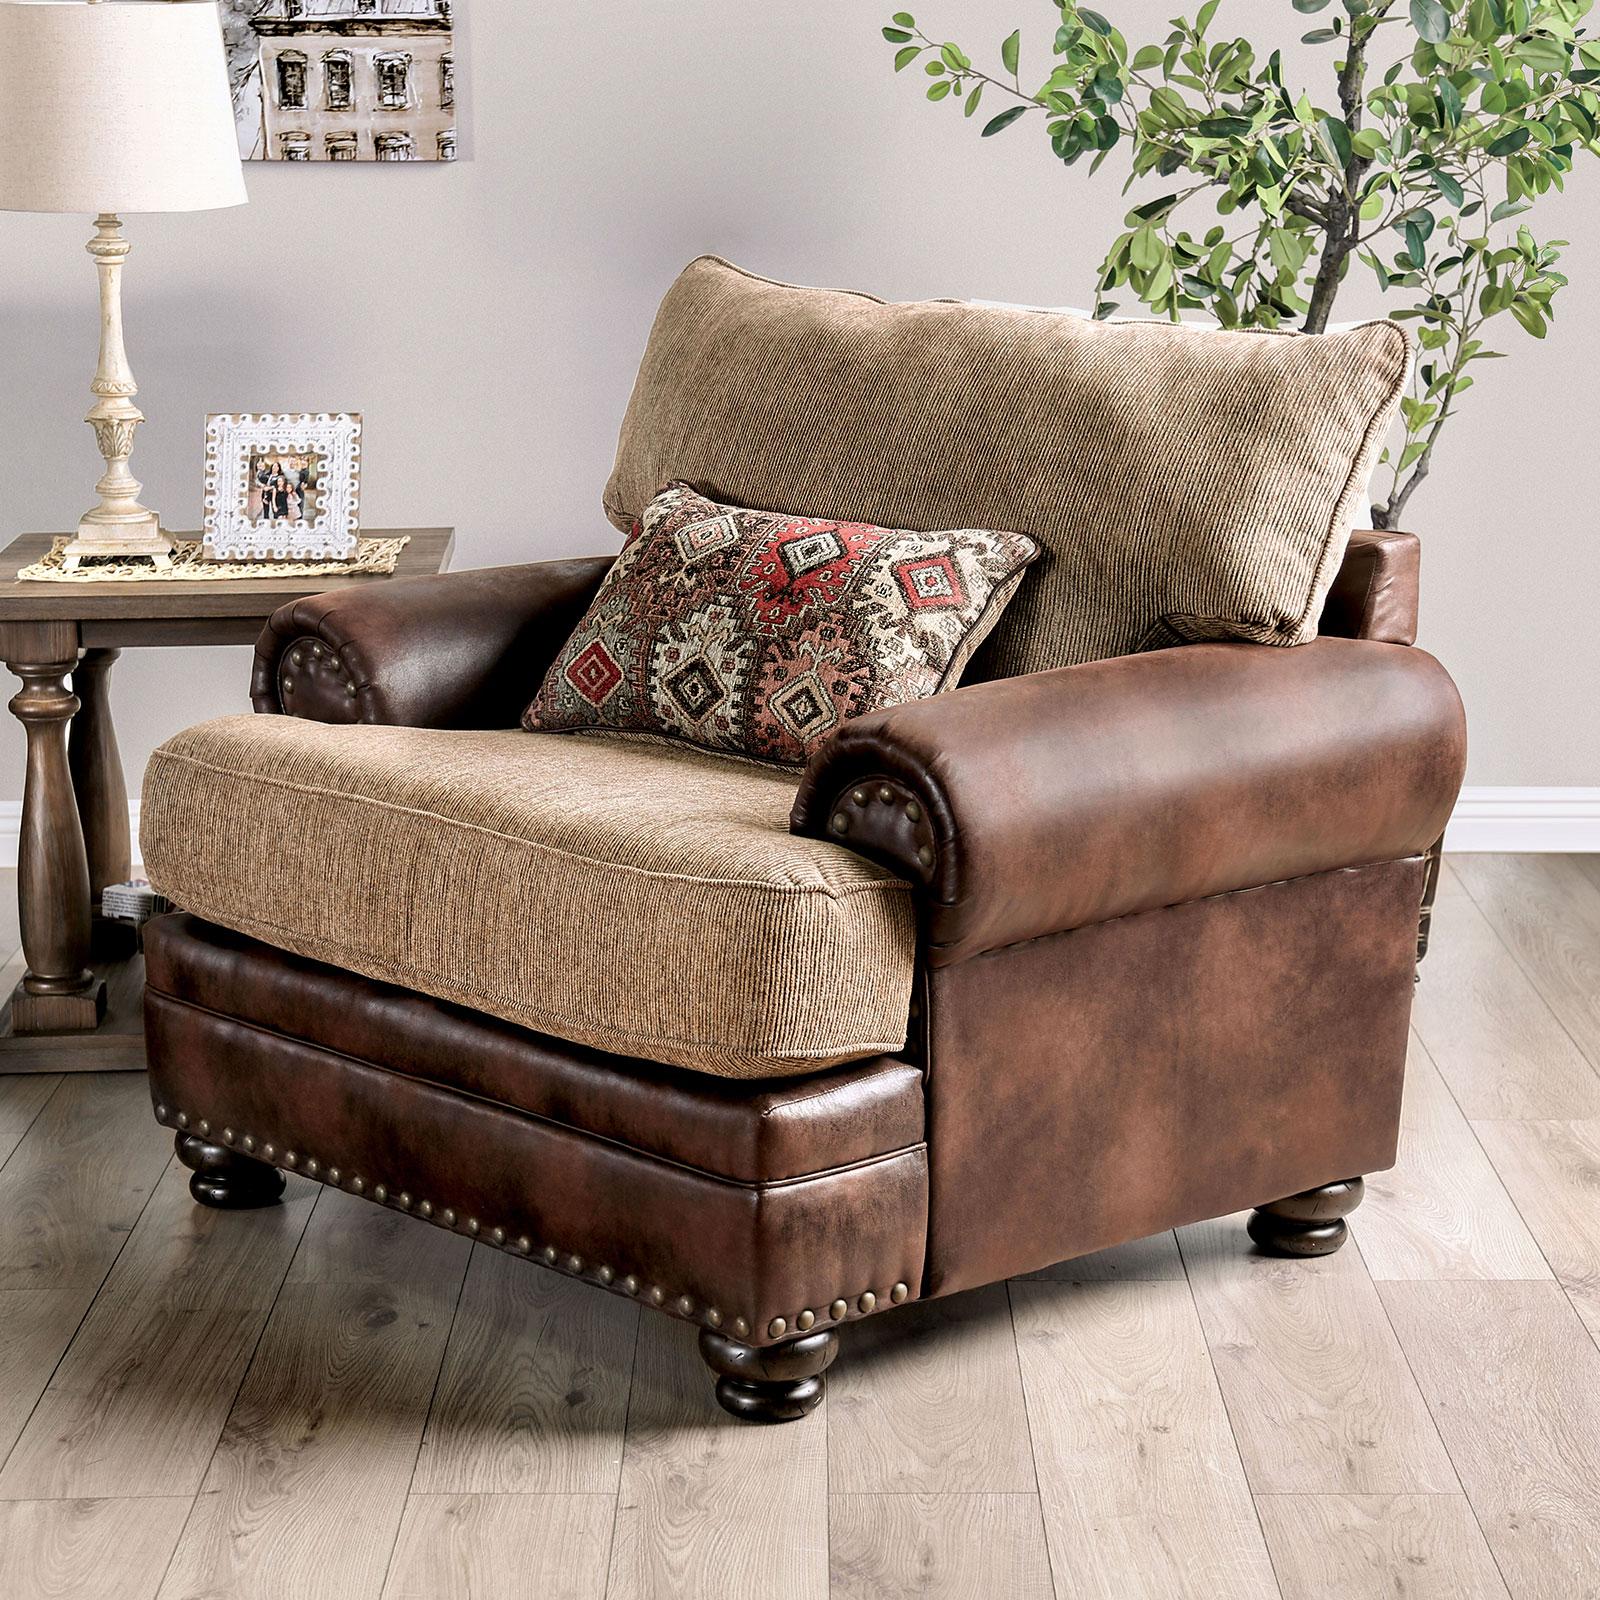 Transitional Arm Chair FLETCHER SM5148-CH SM5148-CH in Brown Leatherette